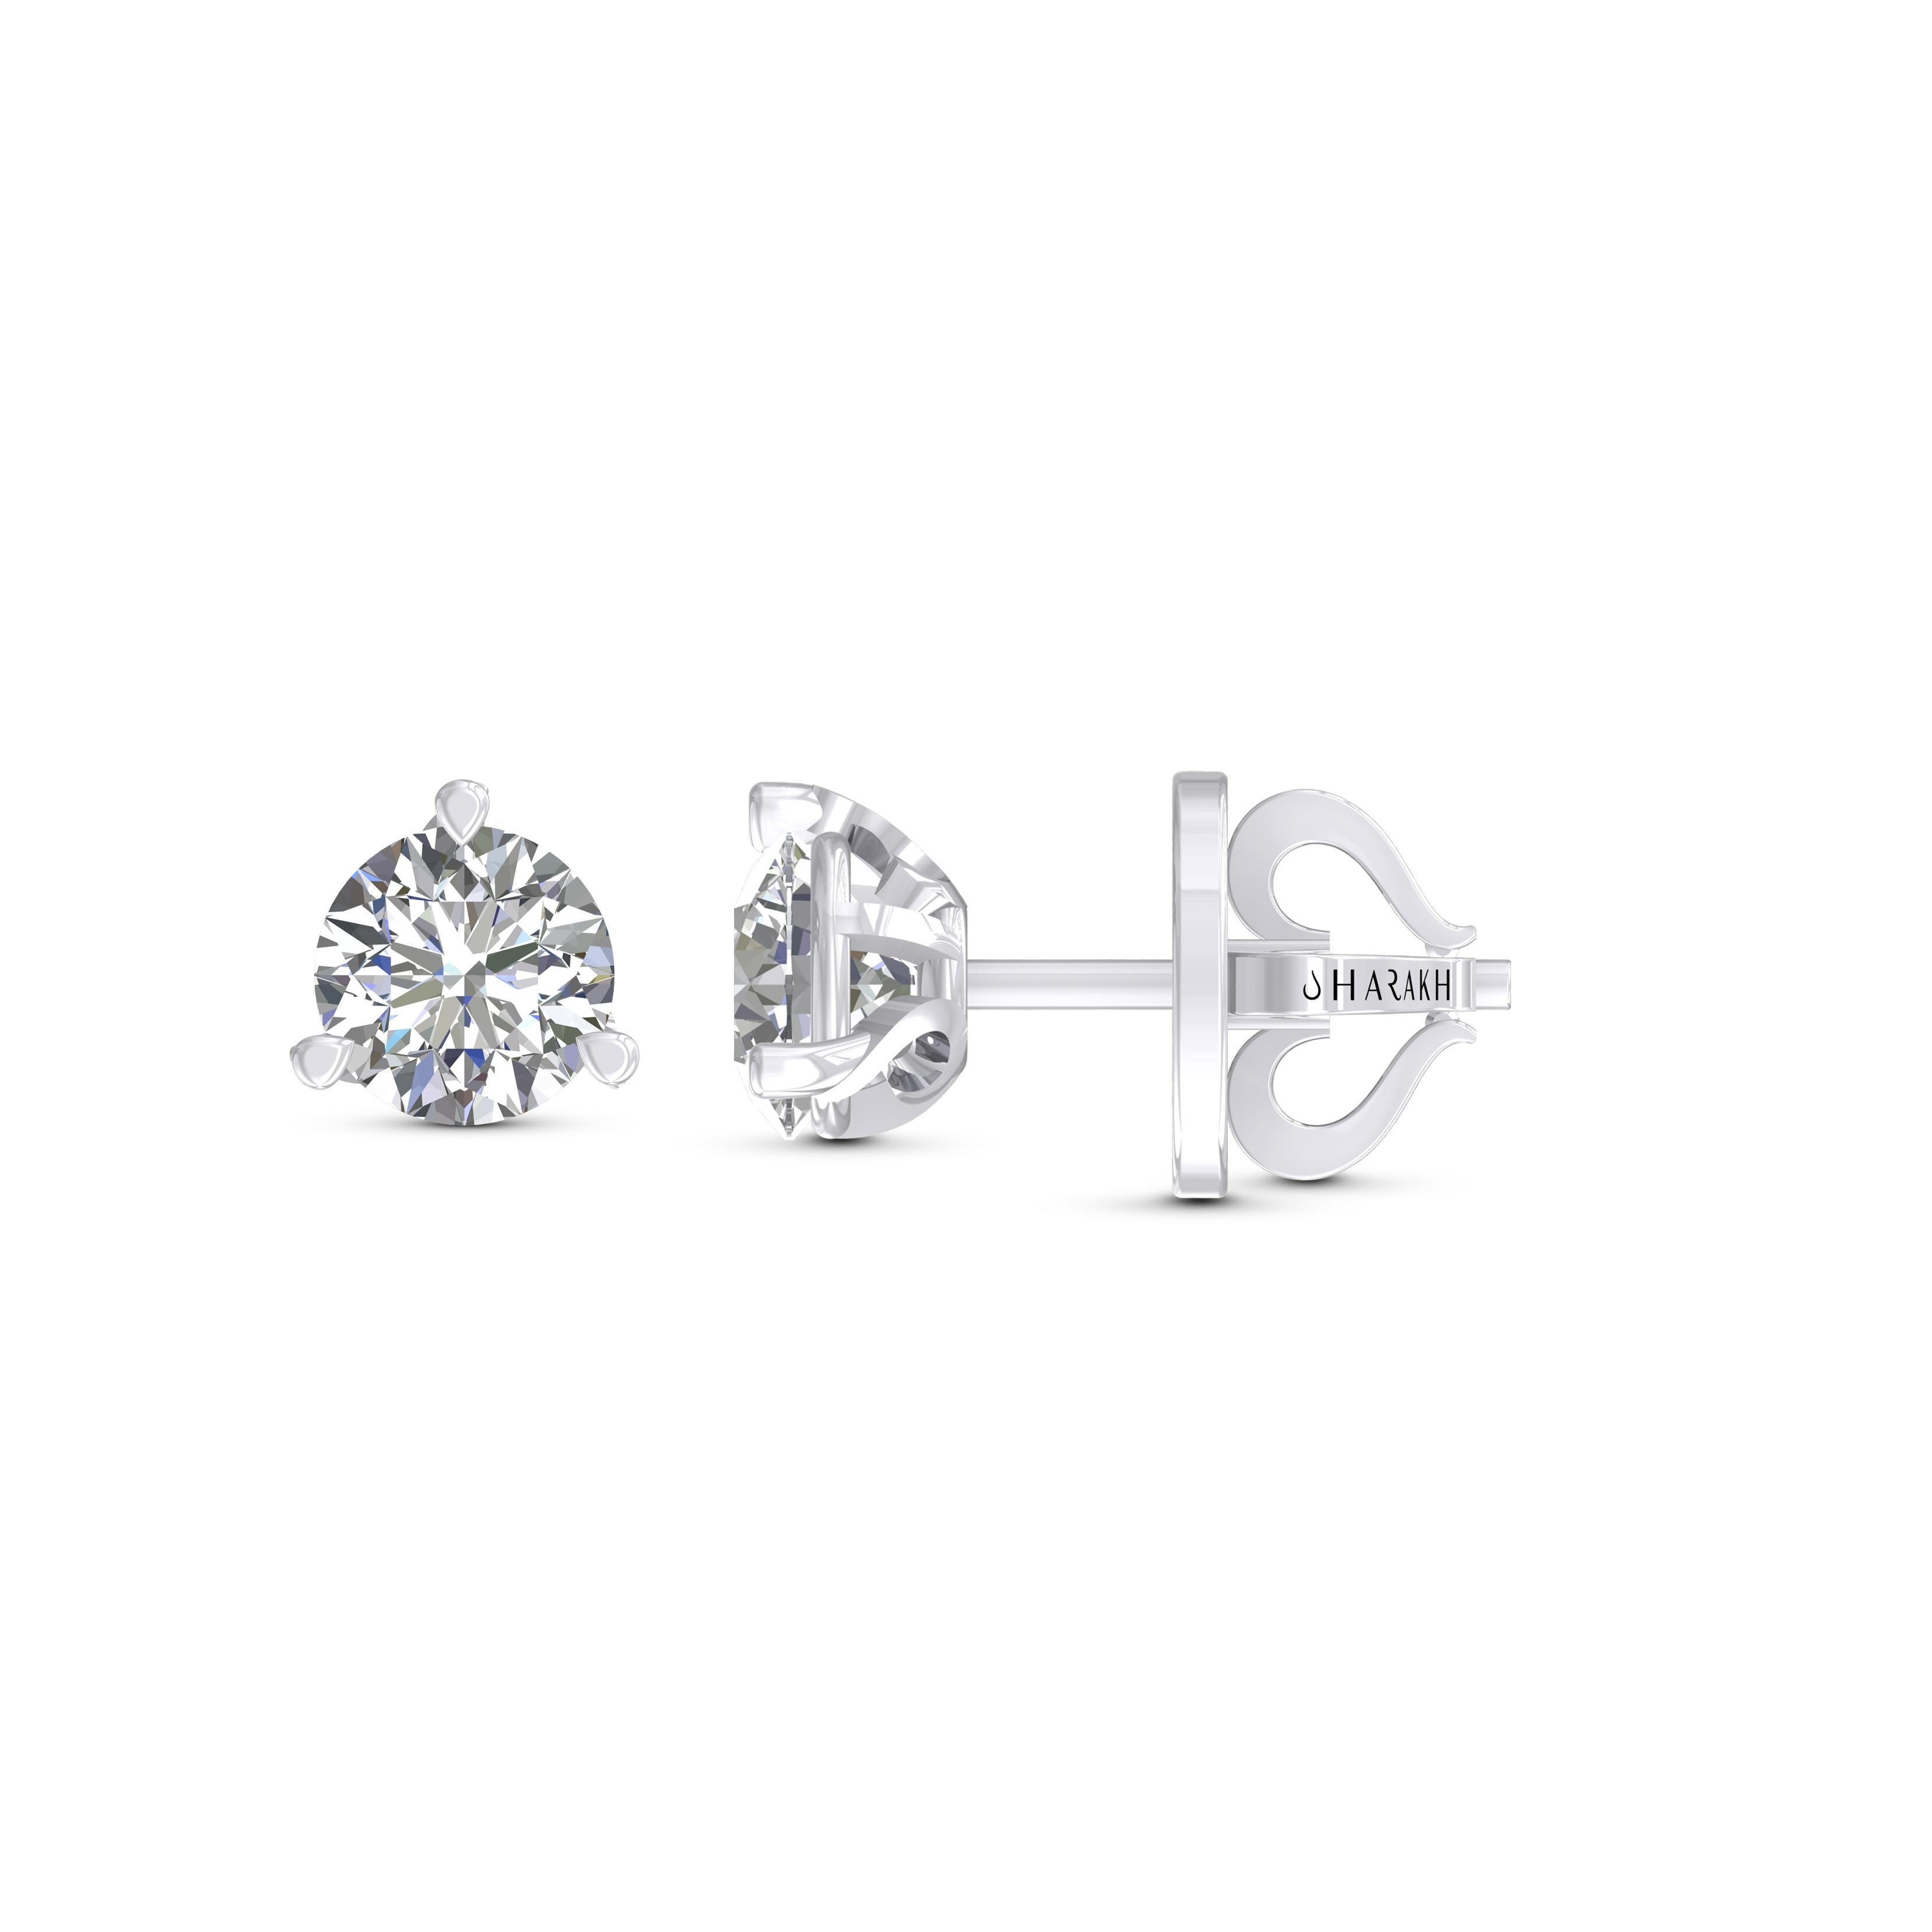 These classic GIA certified diamond studs showcase a pair of perfectly matched diamonds weighing total 2.00 carats. Crafted in 18 karat white gold, these are available in yellow and rose gold as well.
Perfect for gifting and for yourself as well.